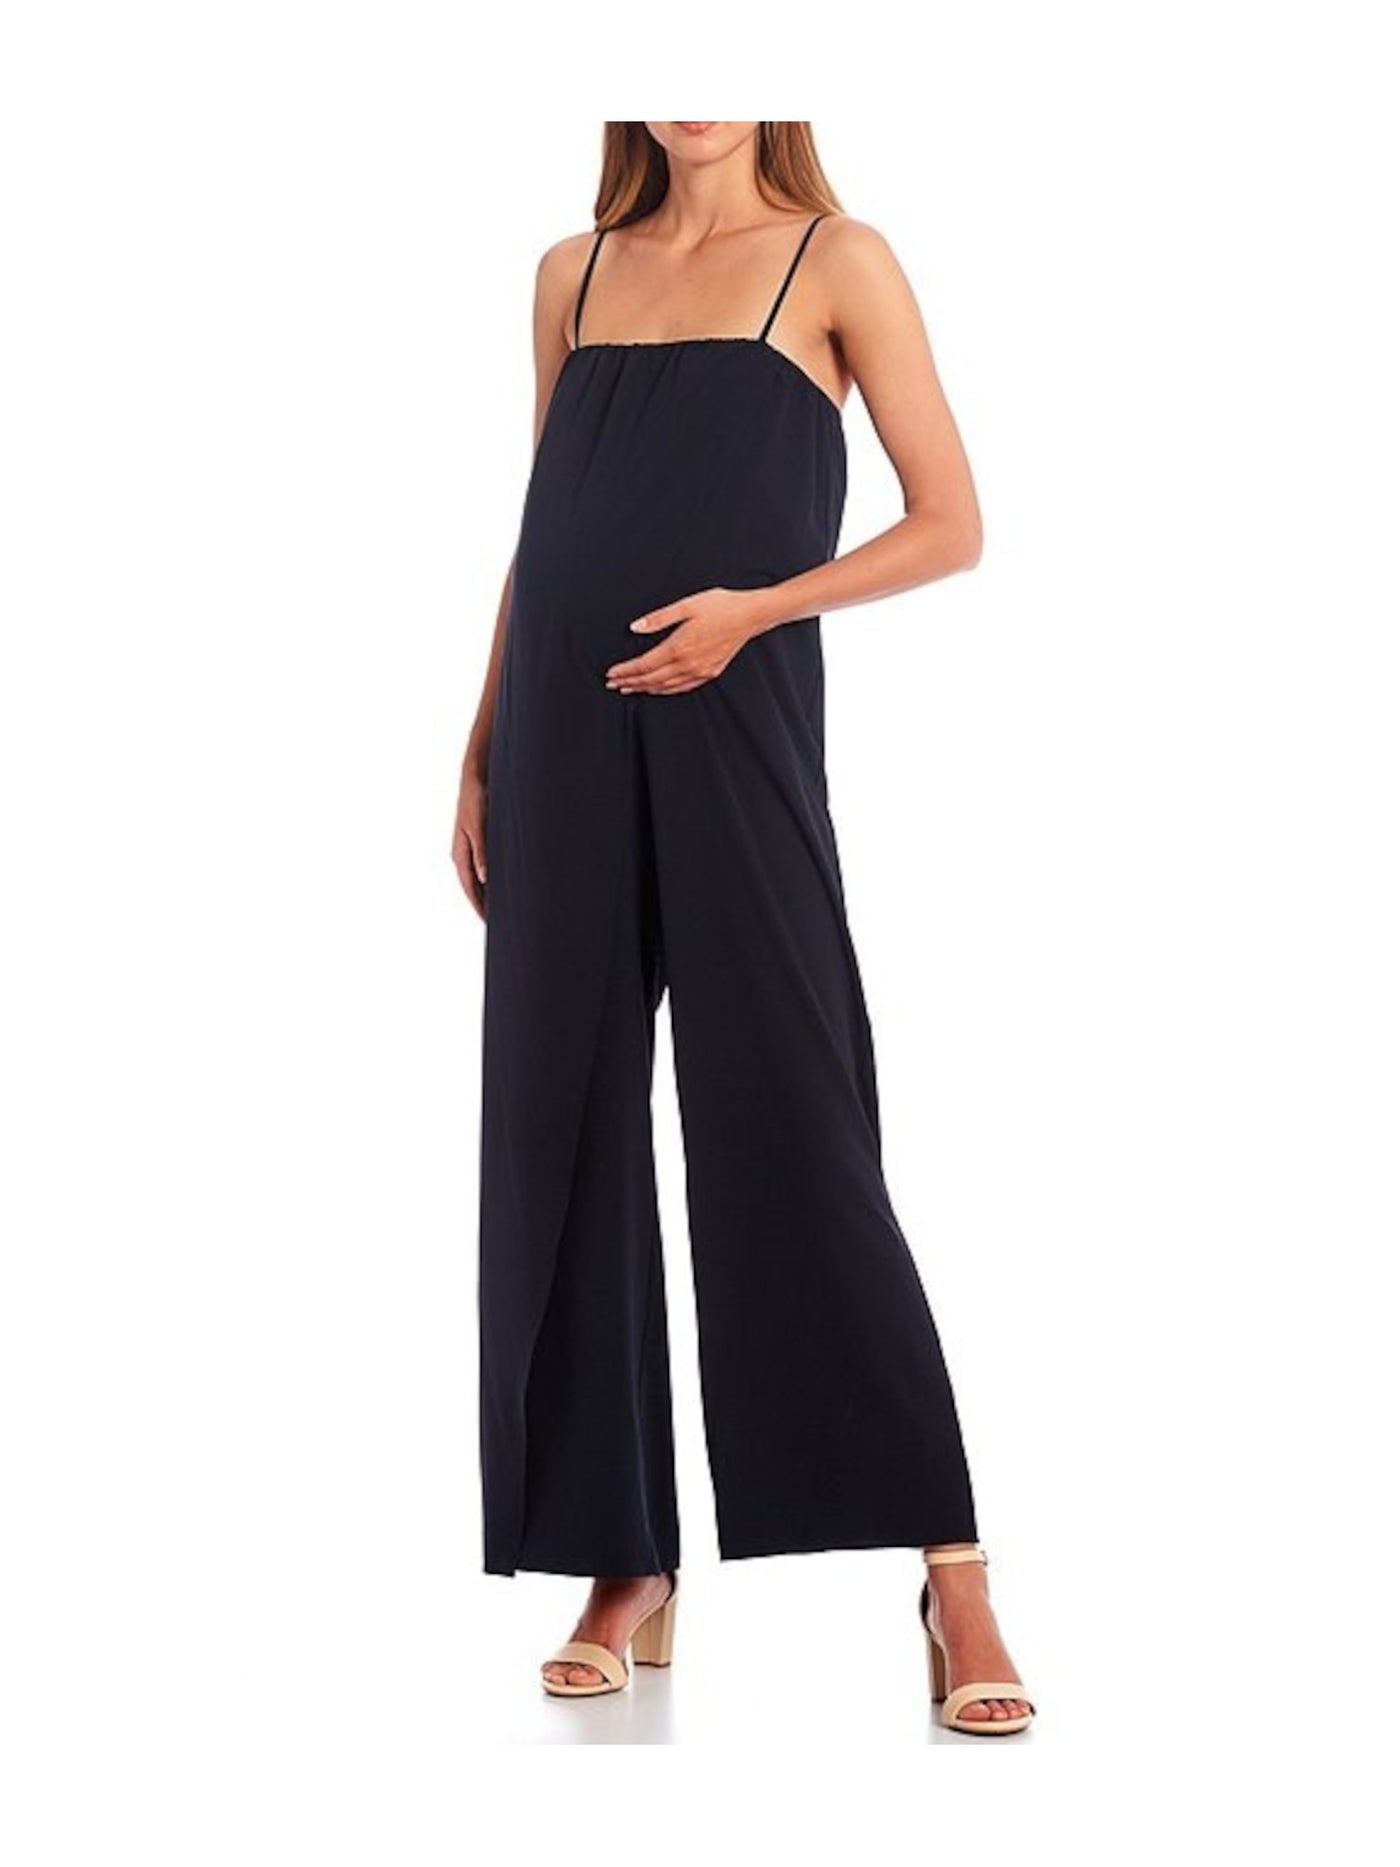 ALEX MARIE Womens Navy Sleeveless Square Neck Party Wide Leg Jumpsuit Maternity 14